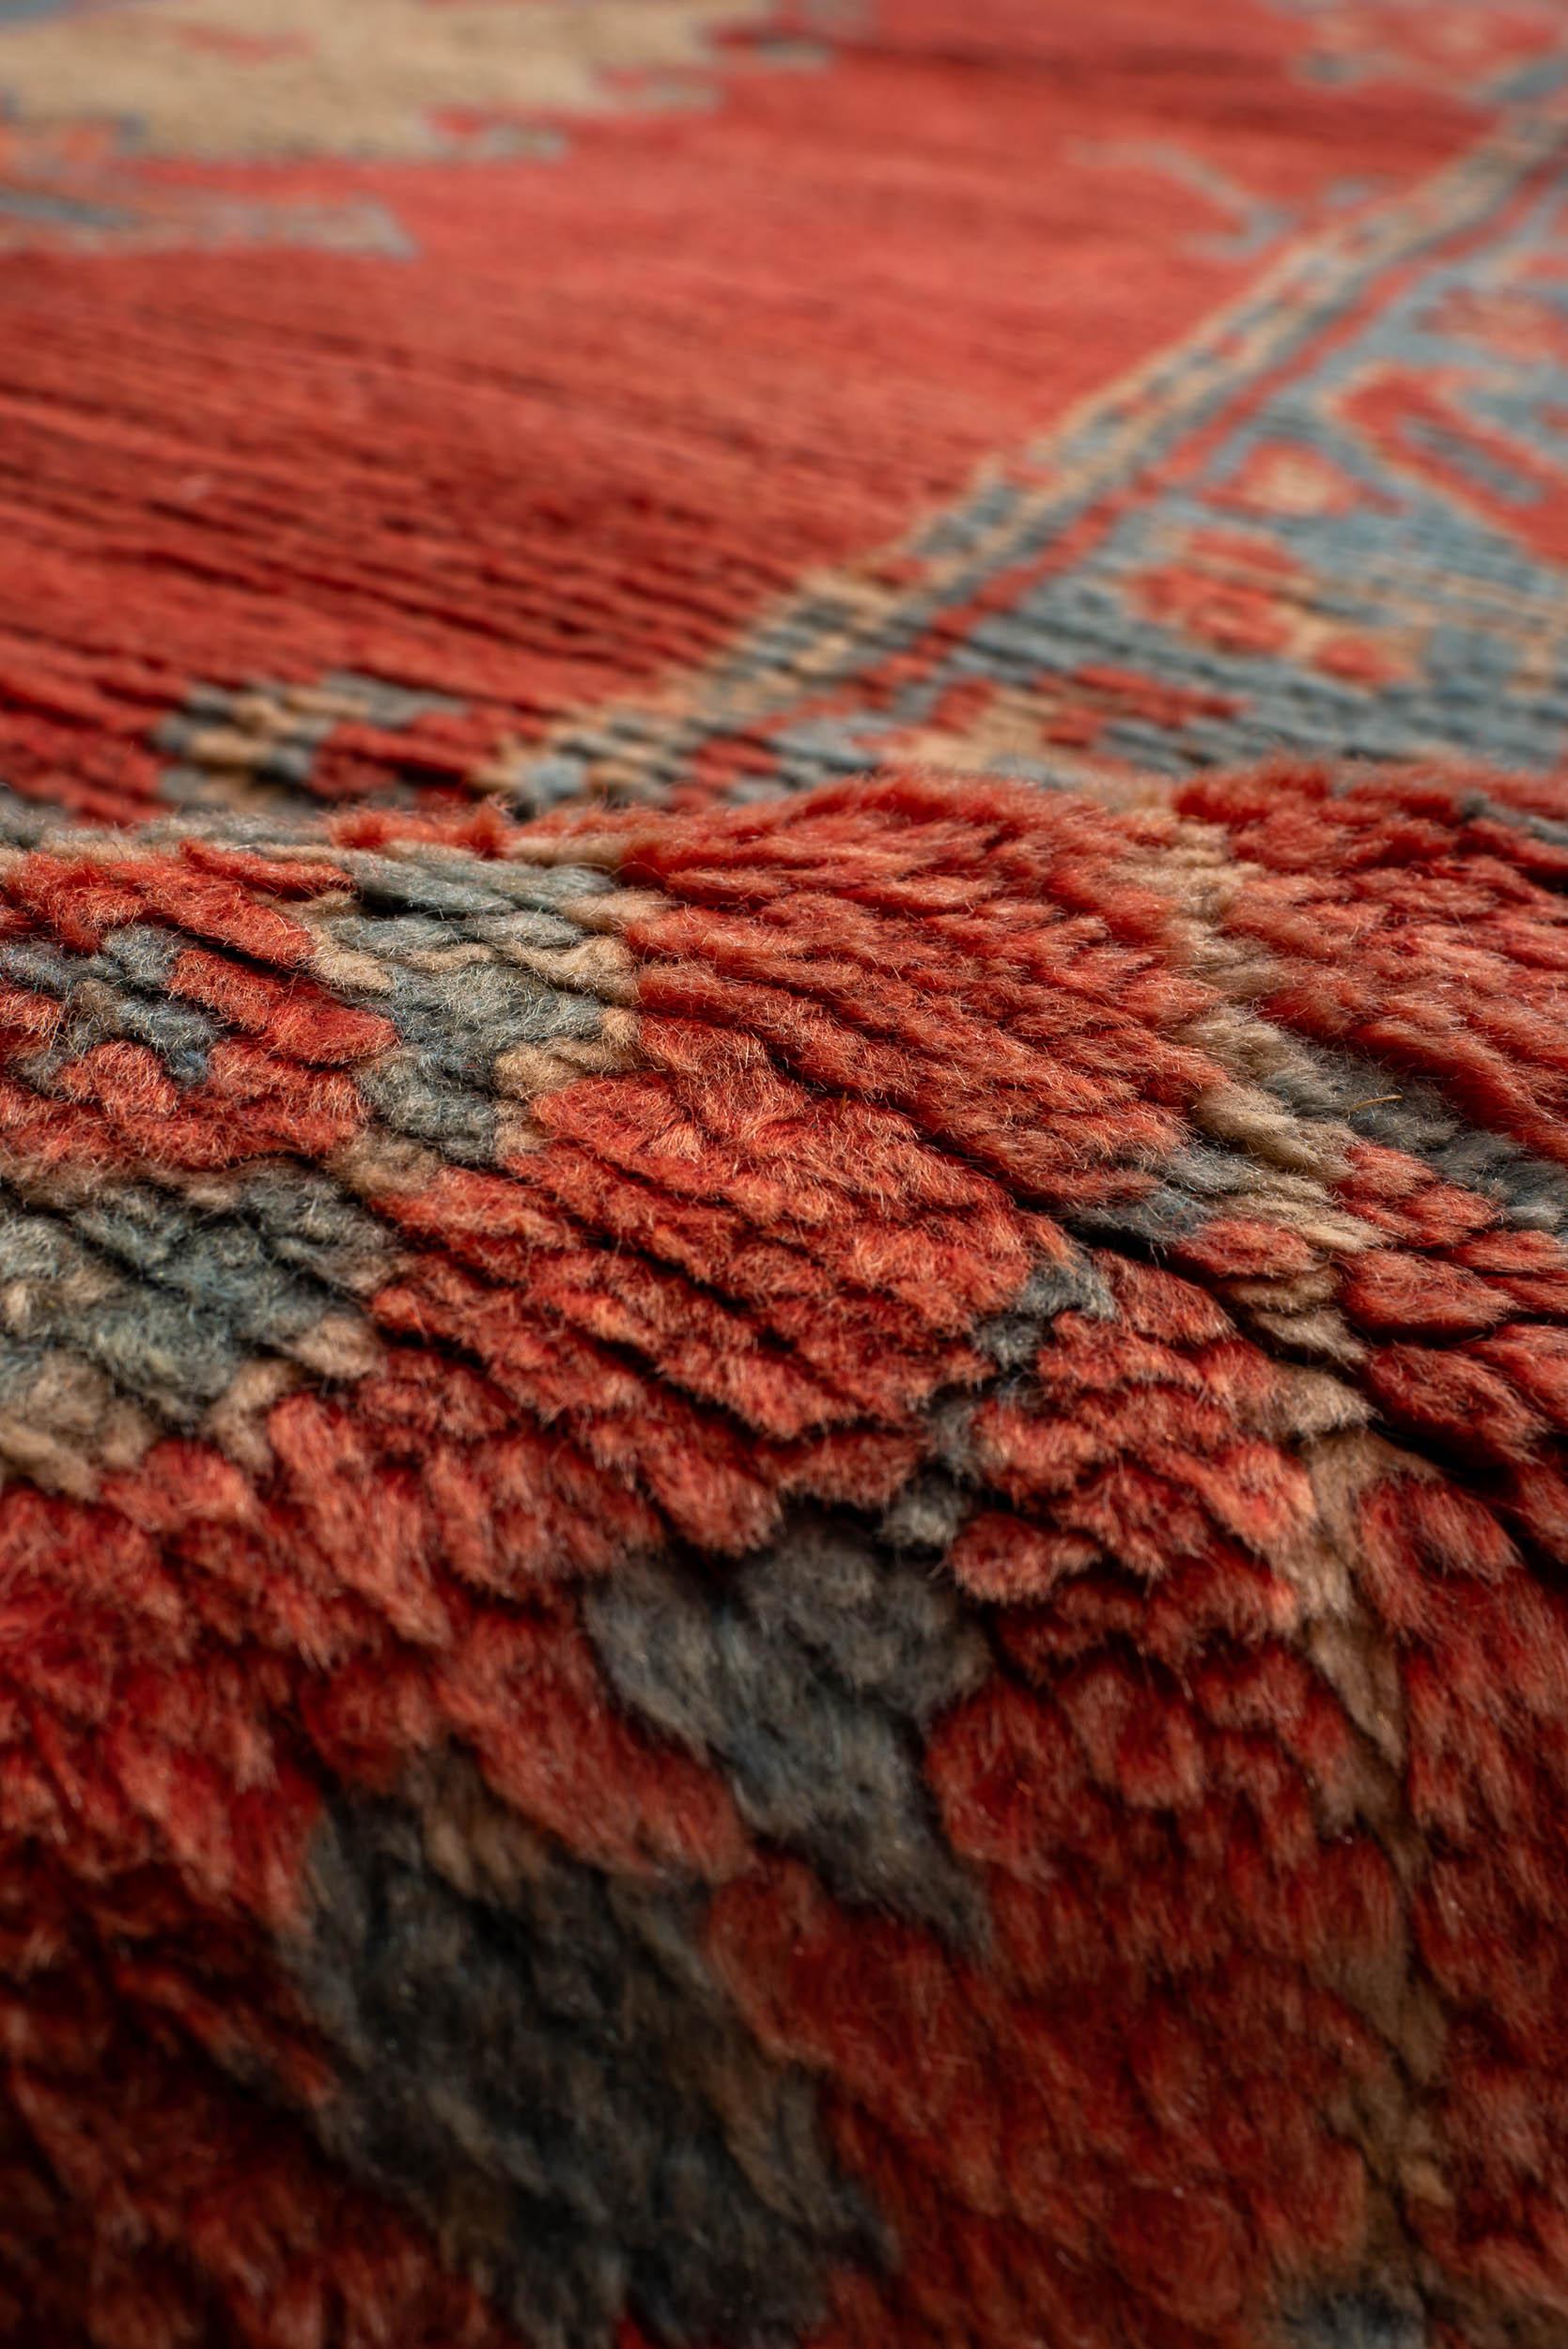 20th Century Antique Turkish Oushak Handwoven Luxury Wool Red Rug,  14'4 x 20' Size For Sale